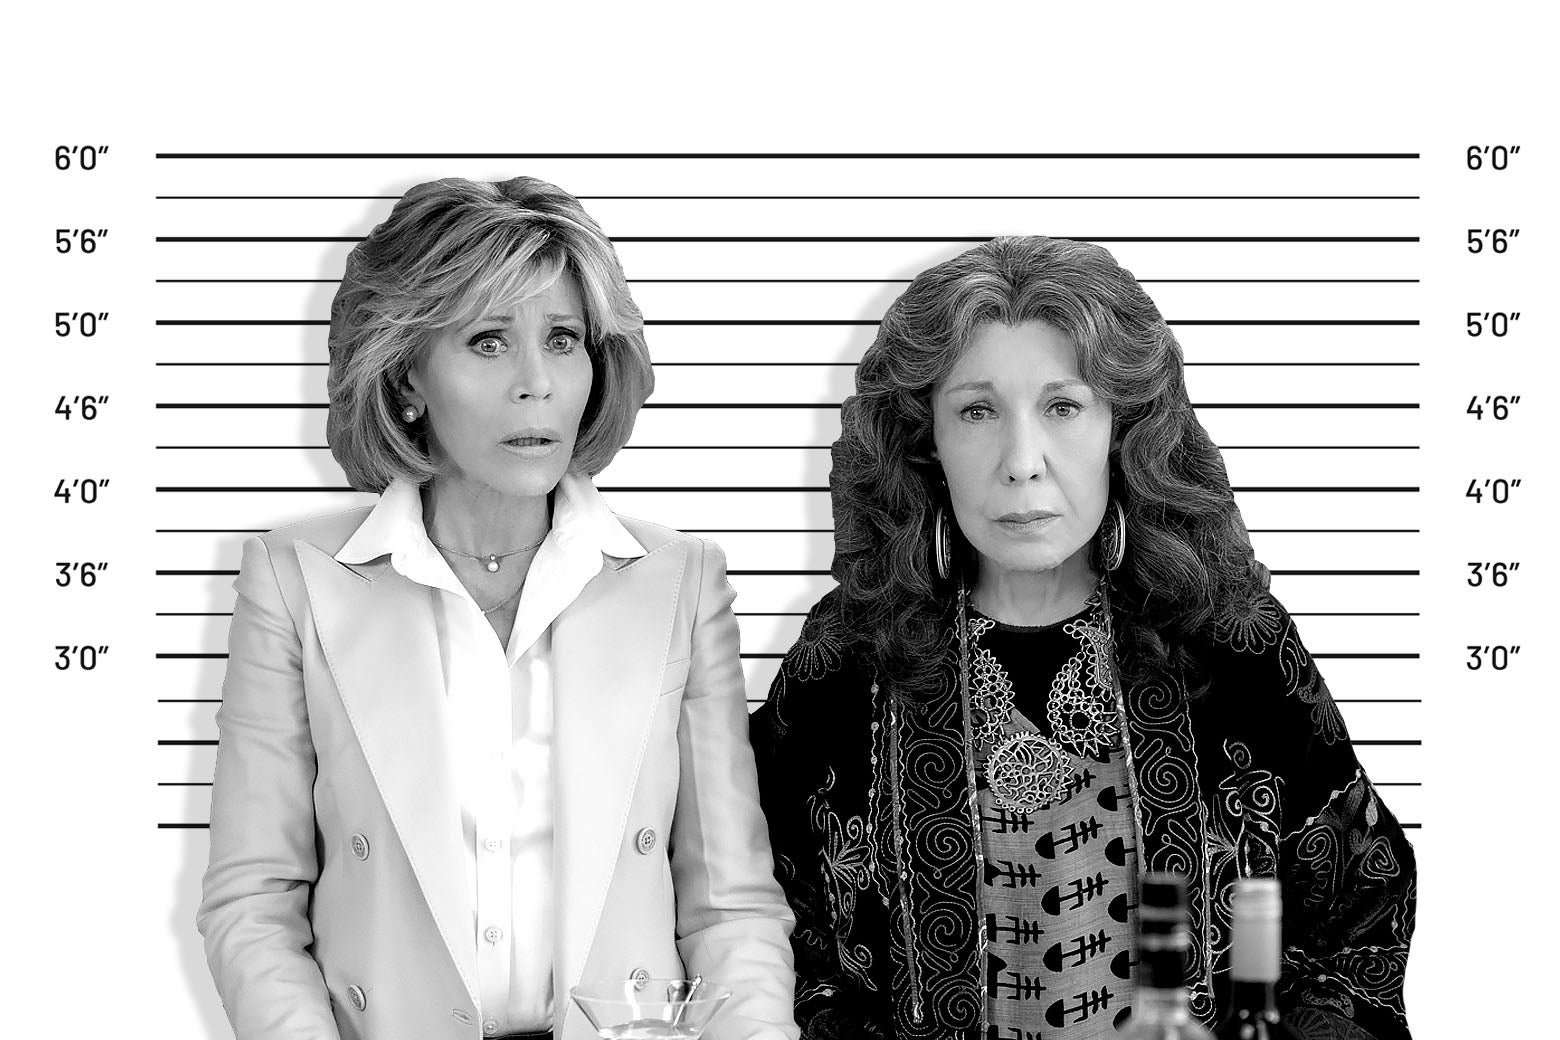 A mugshot-style black-and-white photo shows Jane Fonda and Lily Tomlin standing in front of a latitudinal height marker, their hair big, their clothes bourgie, their expressions shocked and disappointed